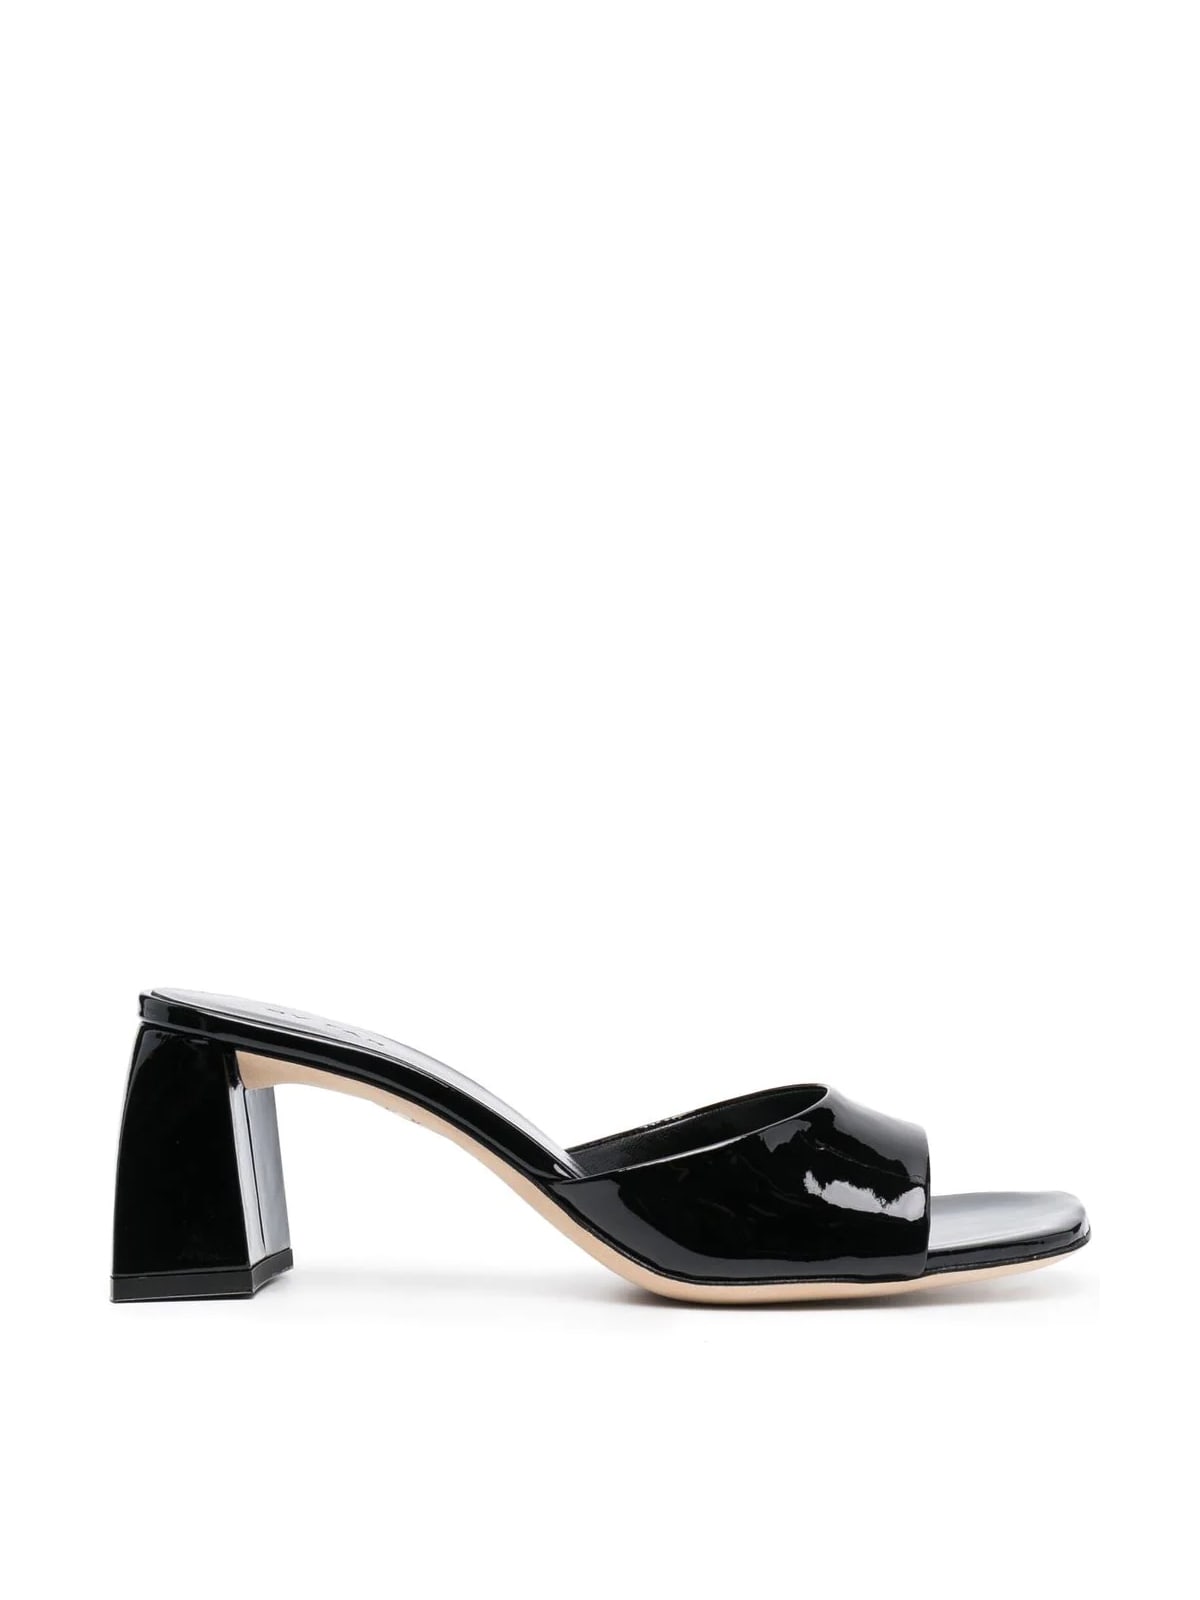 BY FAR Romy Black Patent Leather